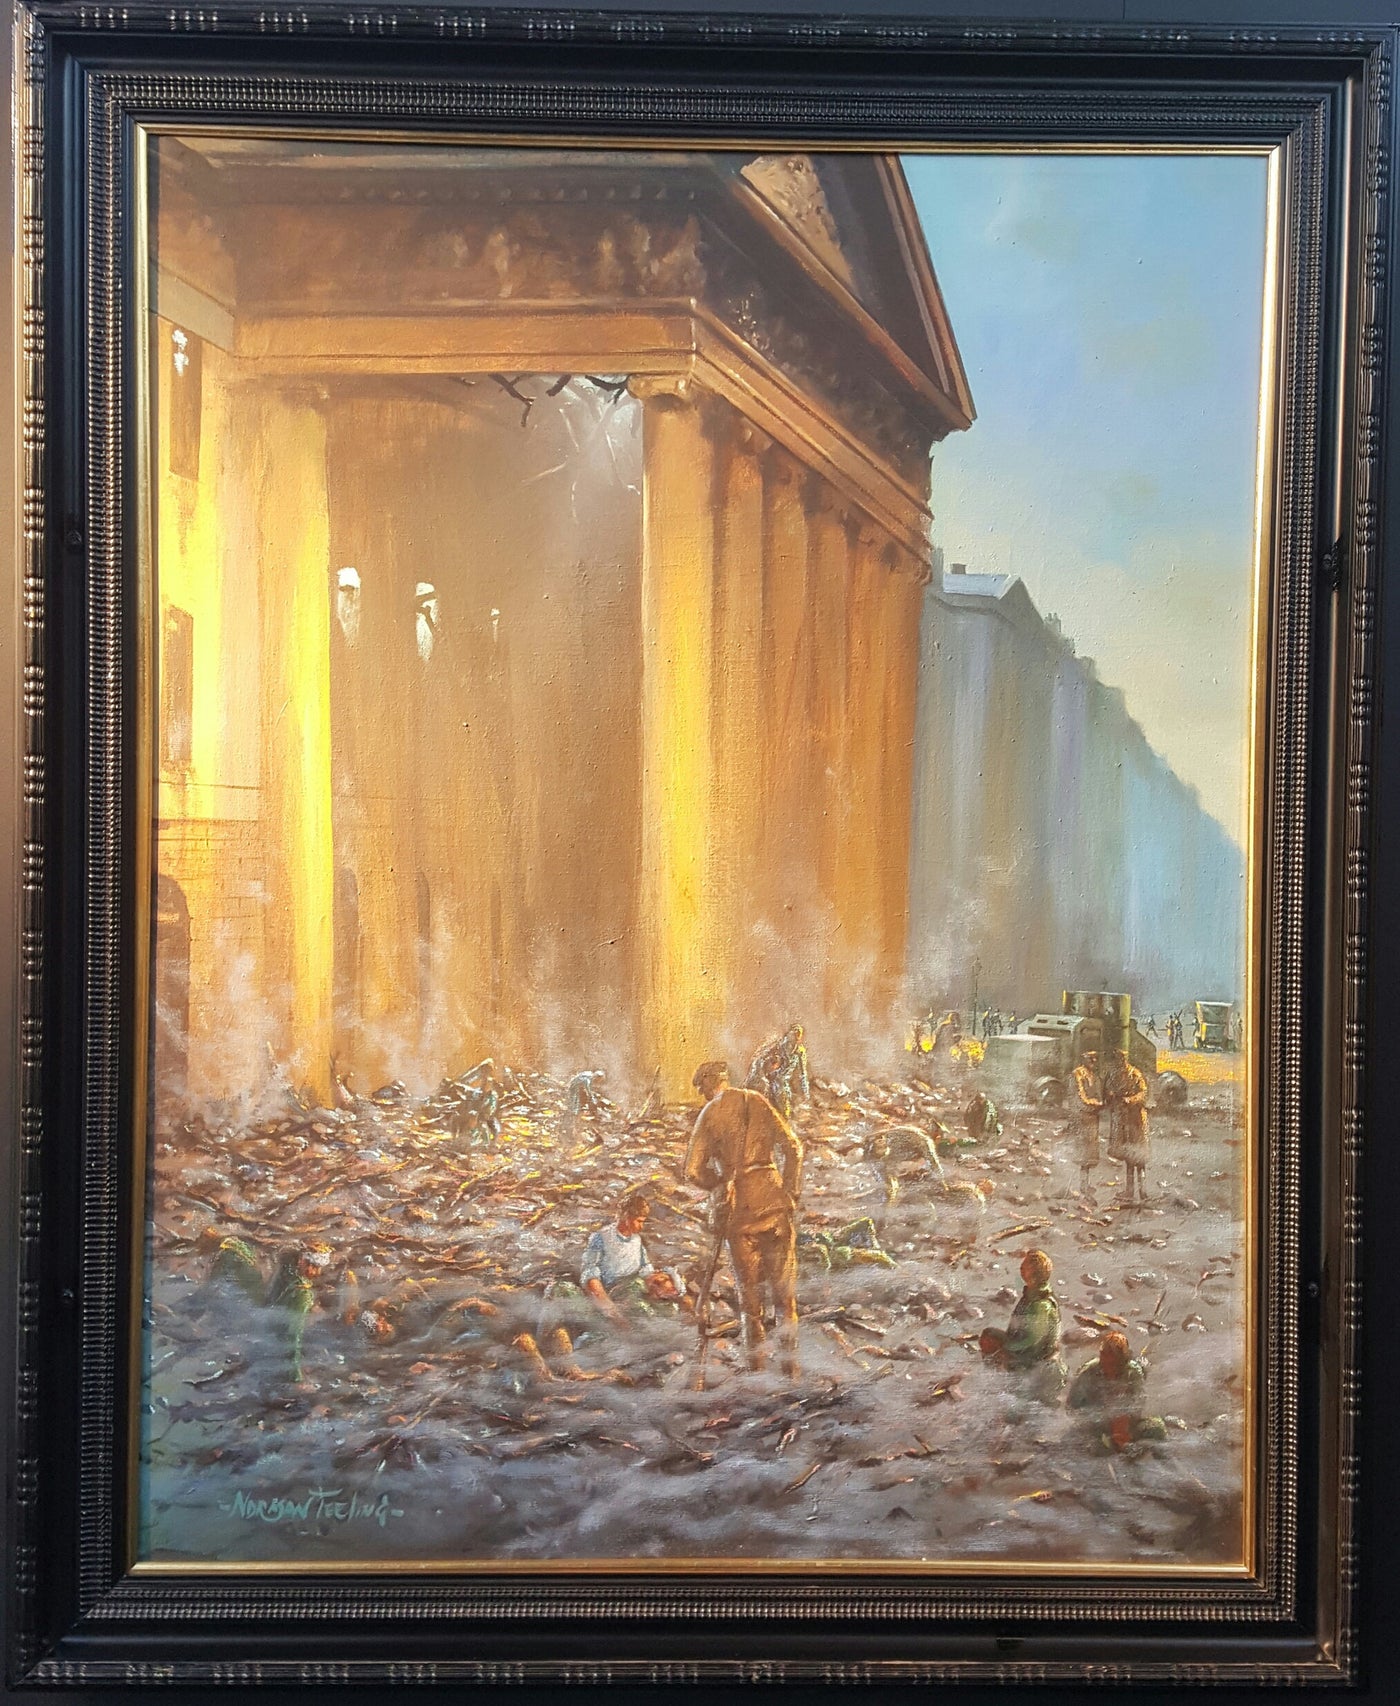 'The Siege Is Ended' by Norman Teeling - Green Gallery